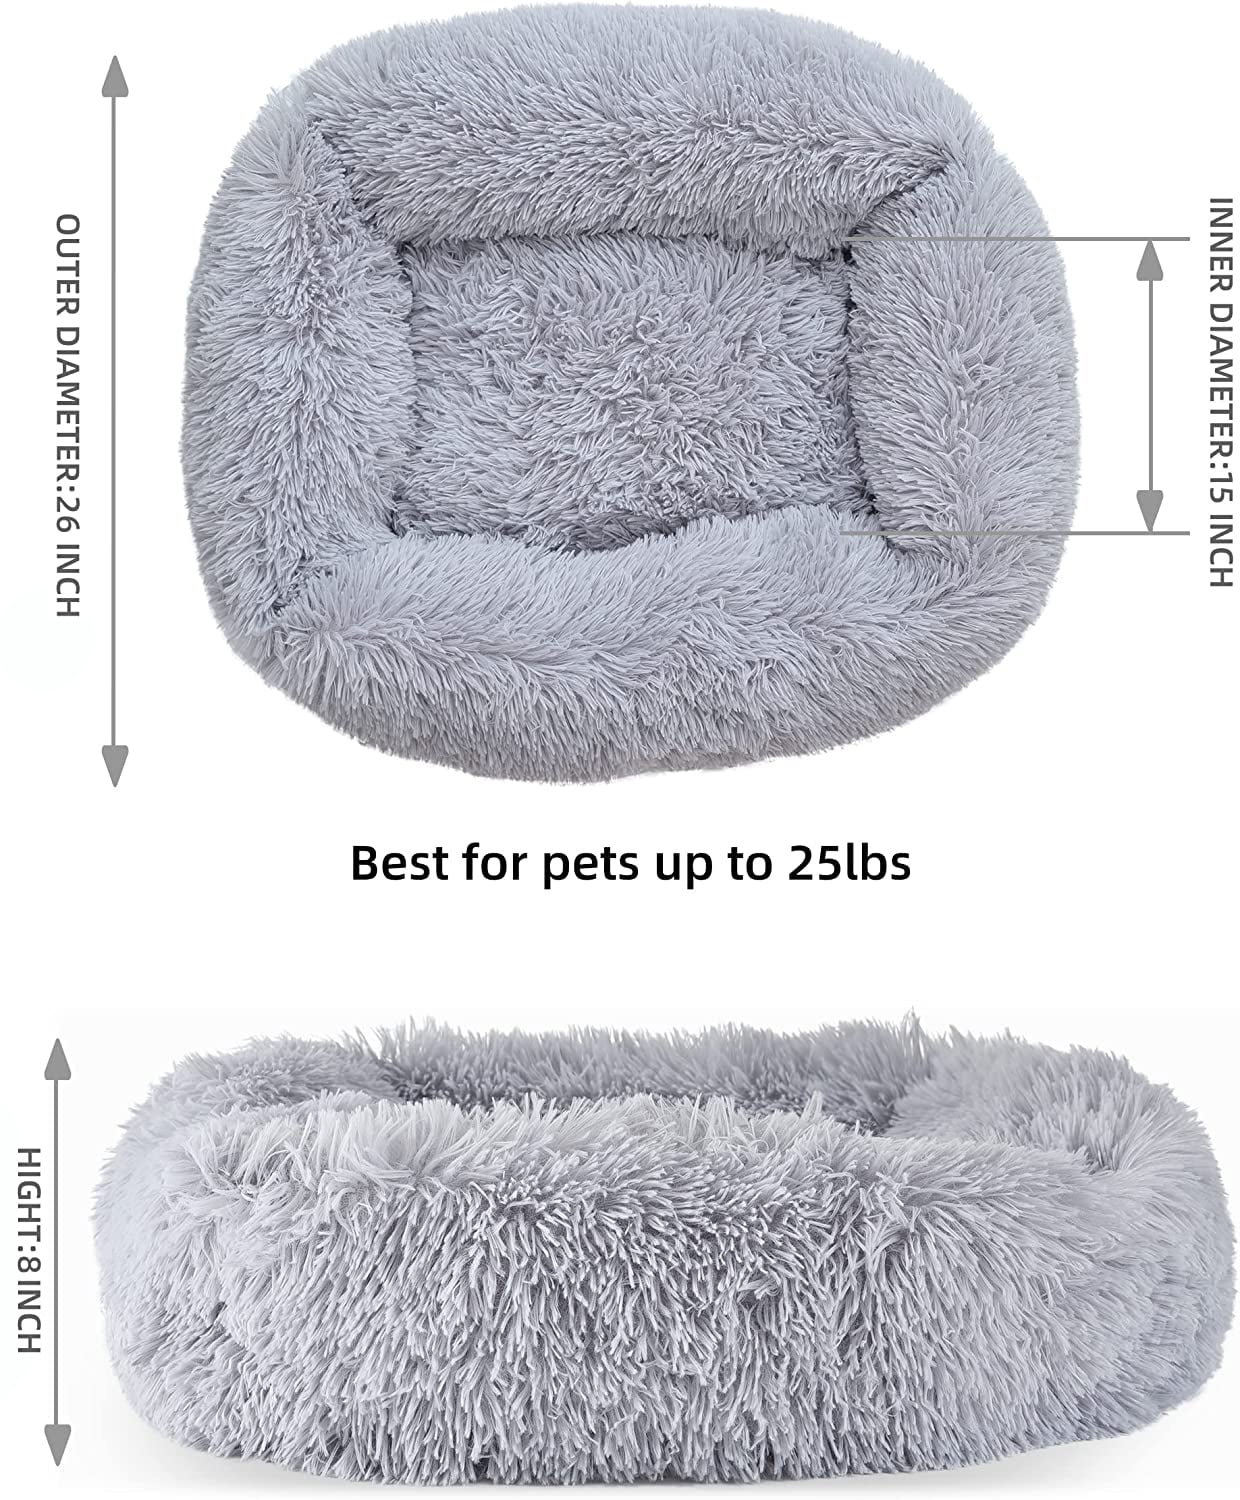 cenadinz S-22 x 18 x 8 in Soft Plush Orthopedic Pet Bed Slepping Mat Cushion for Small Dog Cat Pink